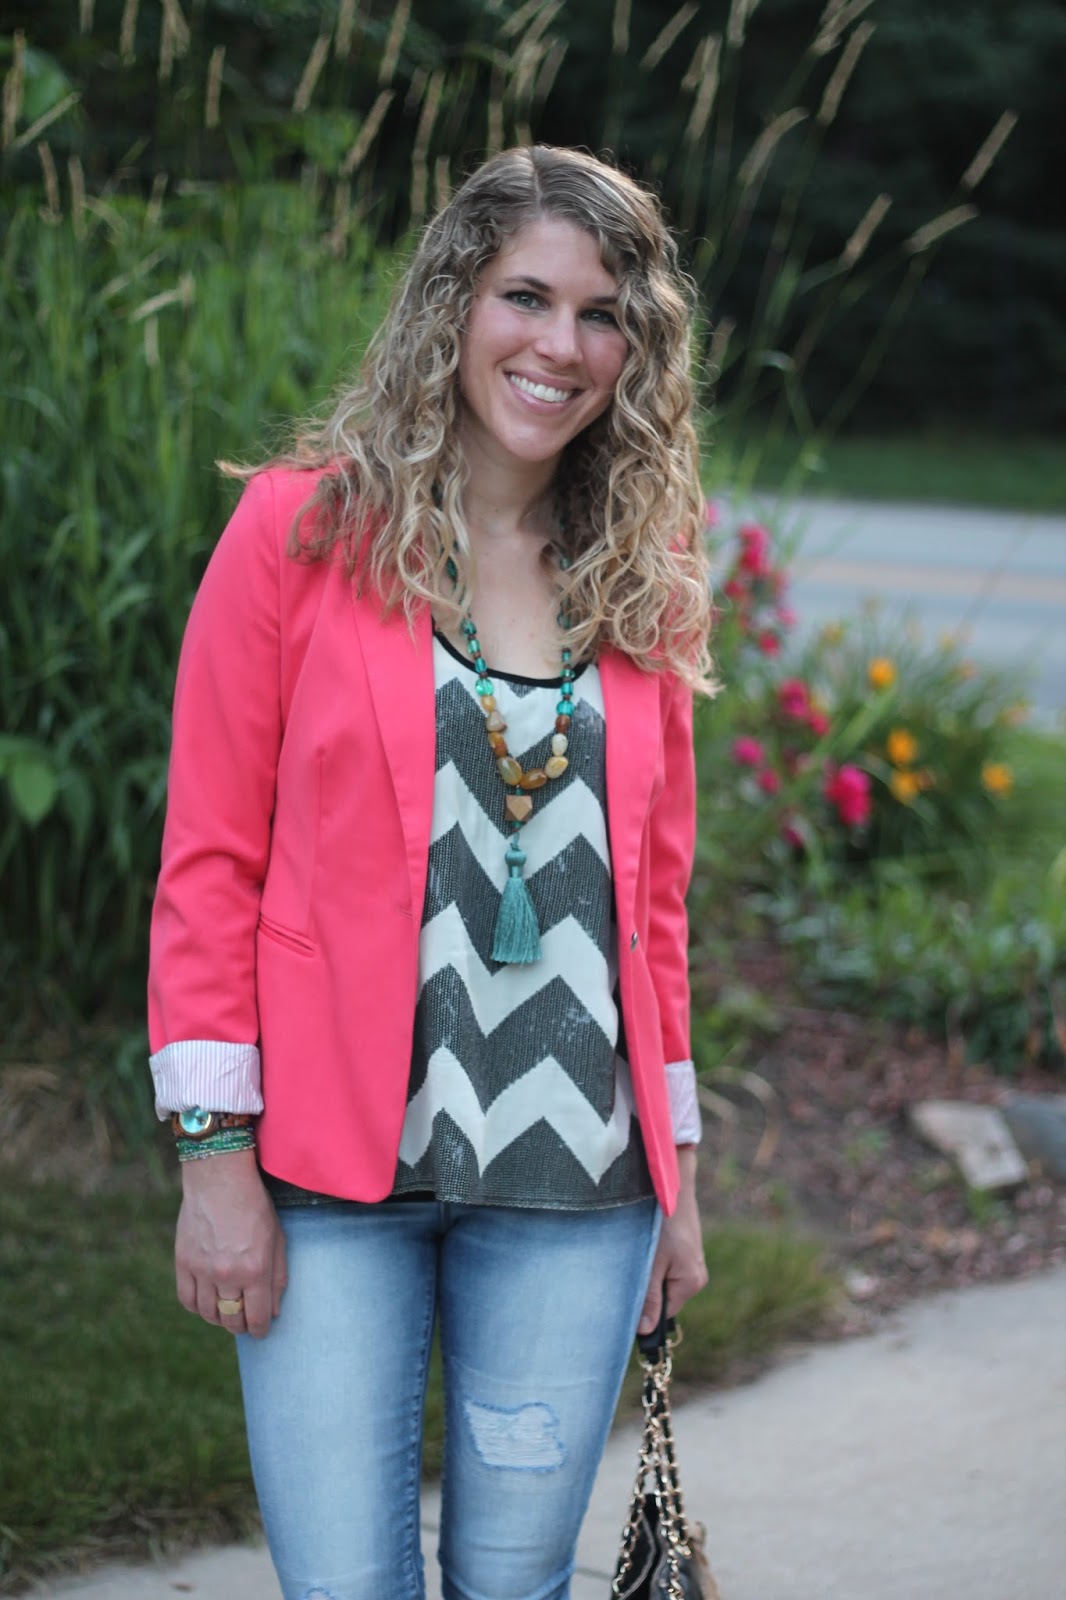 I do deClaire: Coral Blazer and Sequined Tank